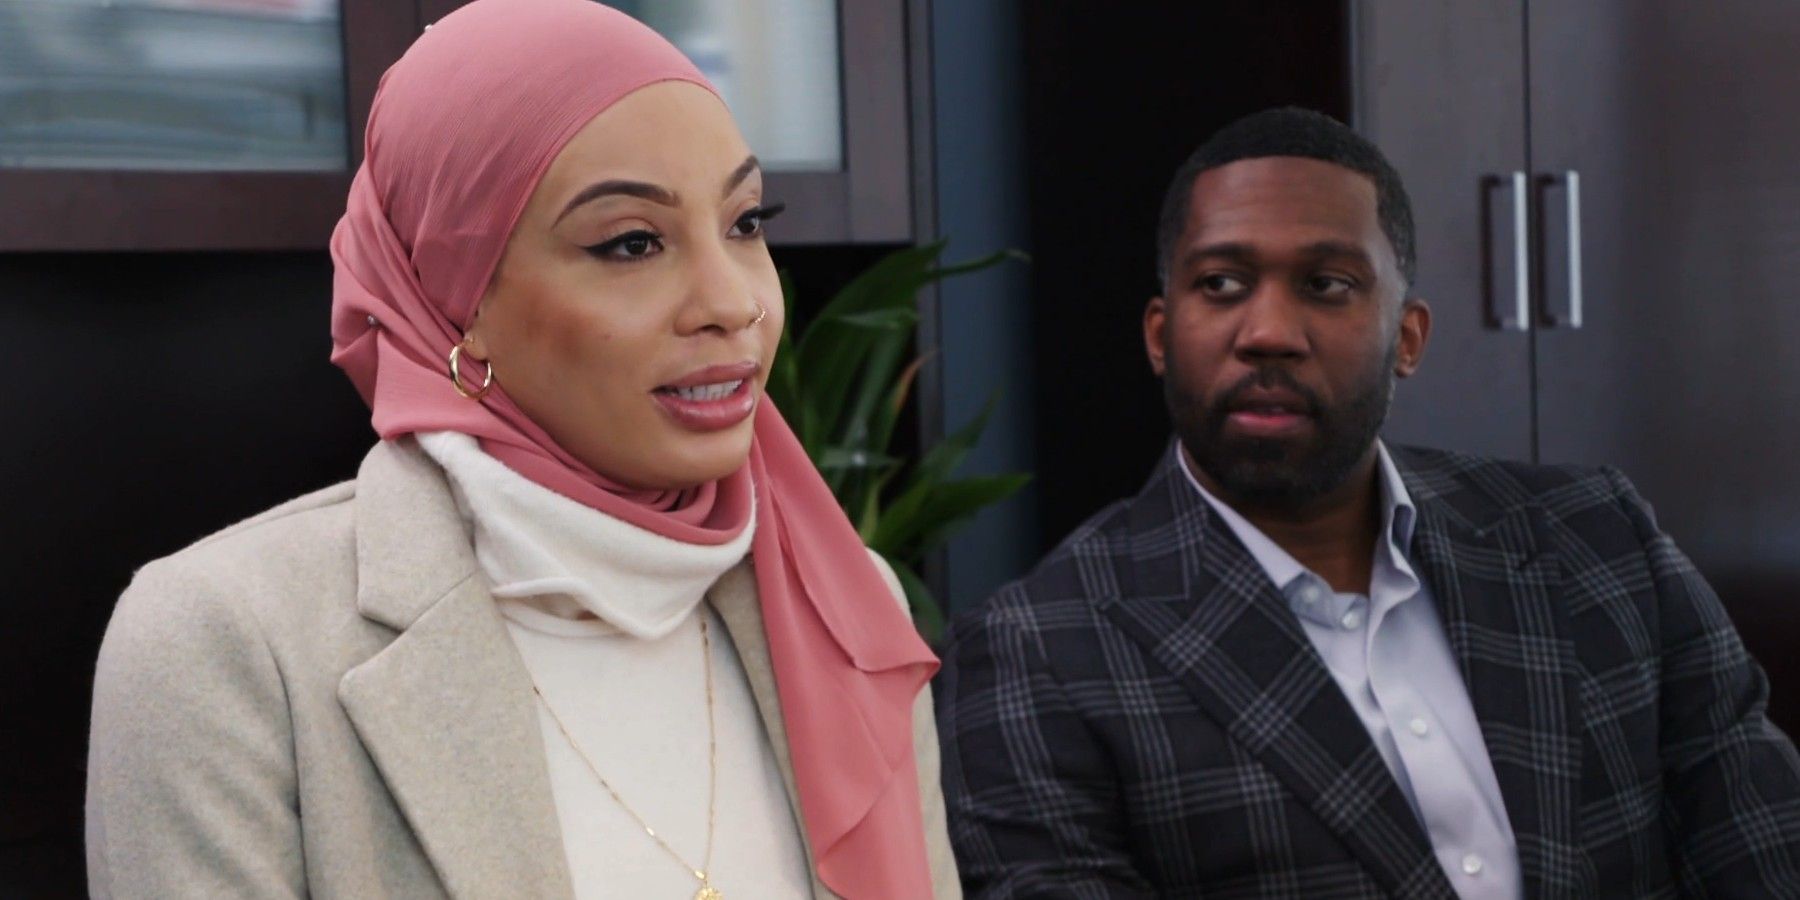 90 Day Fiancé: Happily Ever After? Shaeeda Sween and Bilal Hazziez